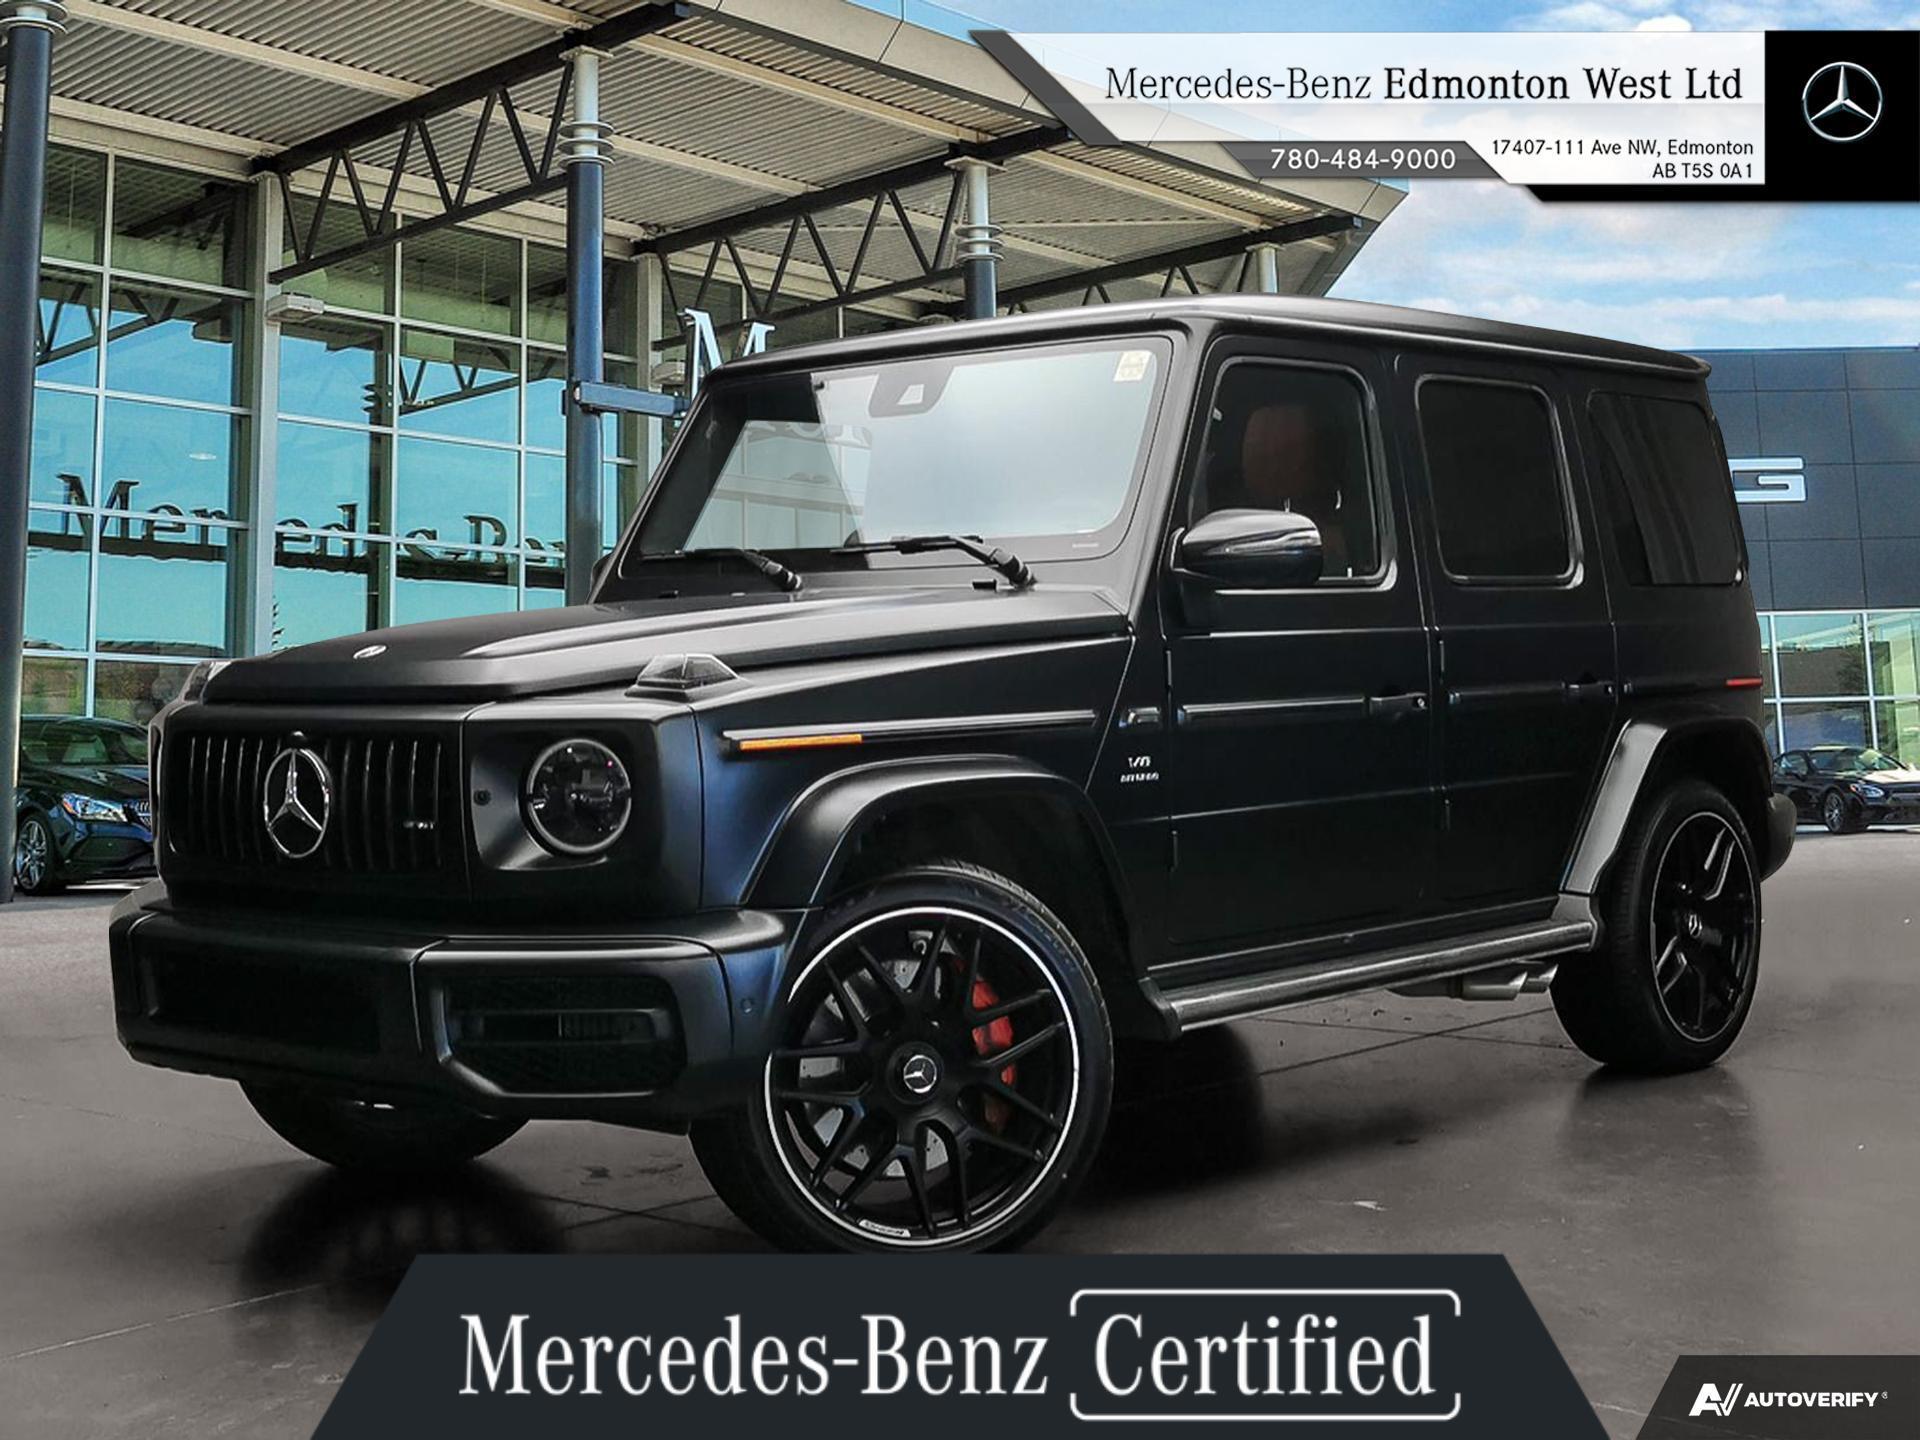 2021 Mercedes-Benz G-Class AMG G 63 4MATIC  - Low Kms - 577HP AMG V8 Birturbo